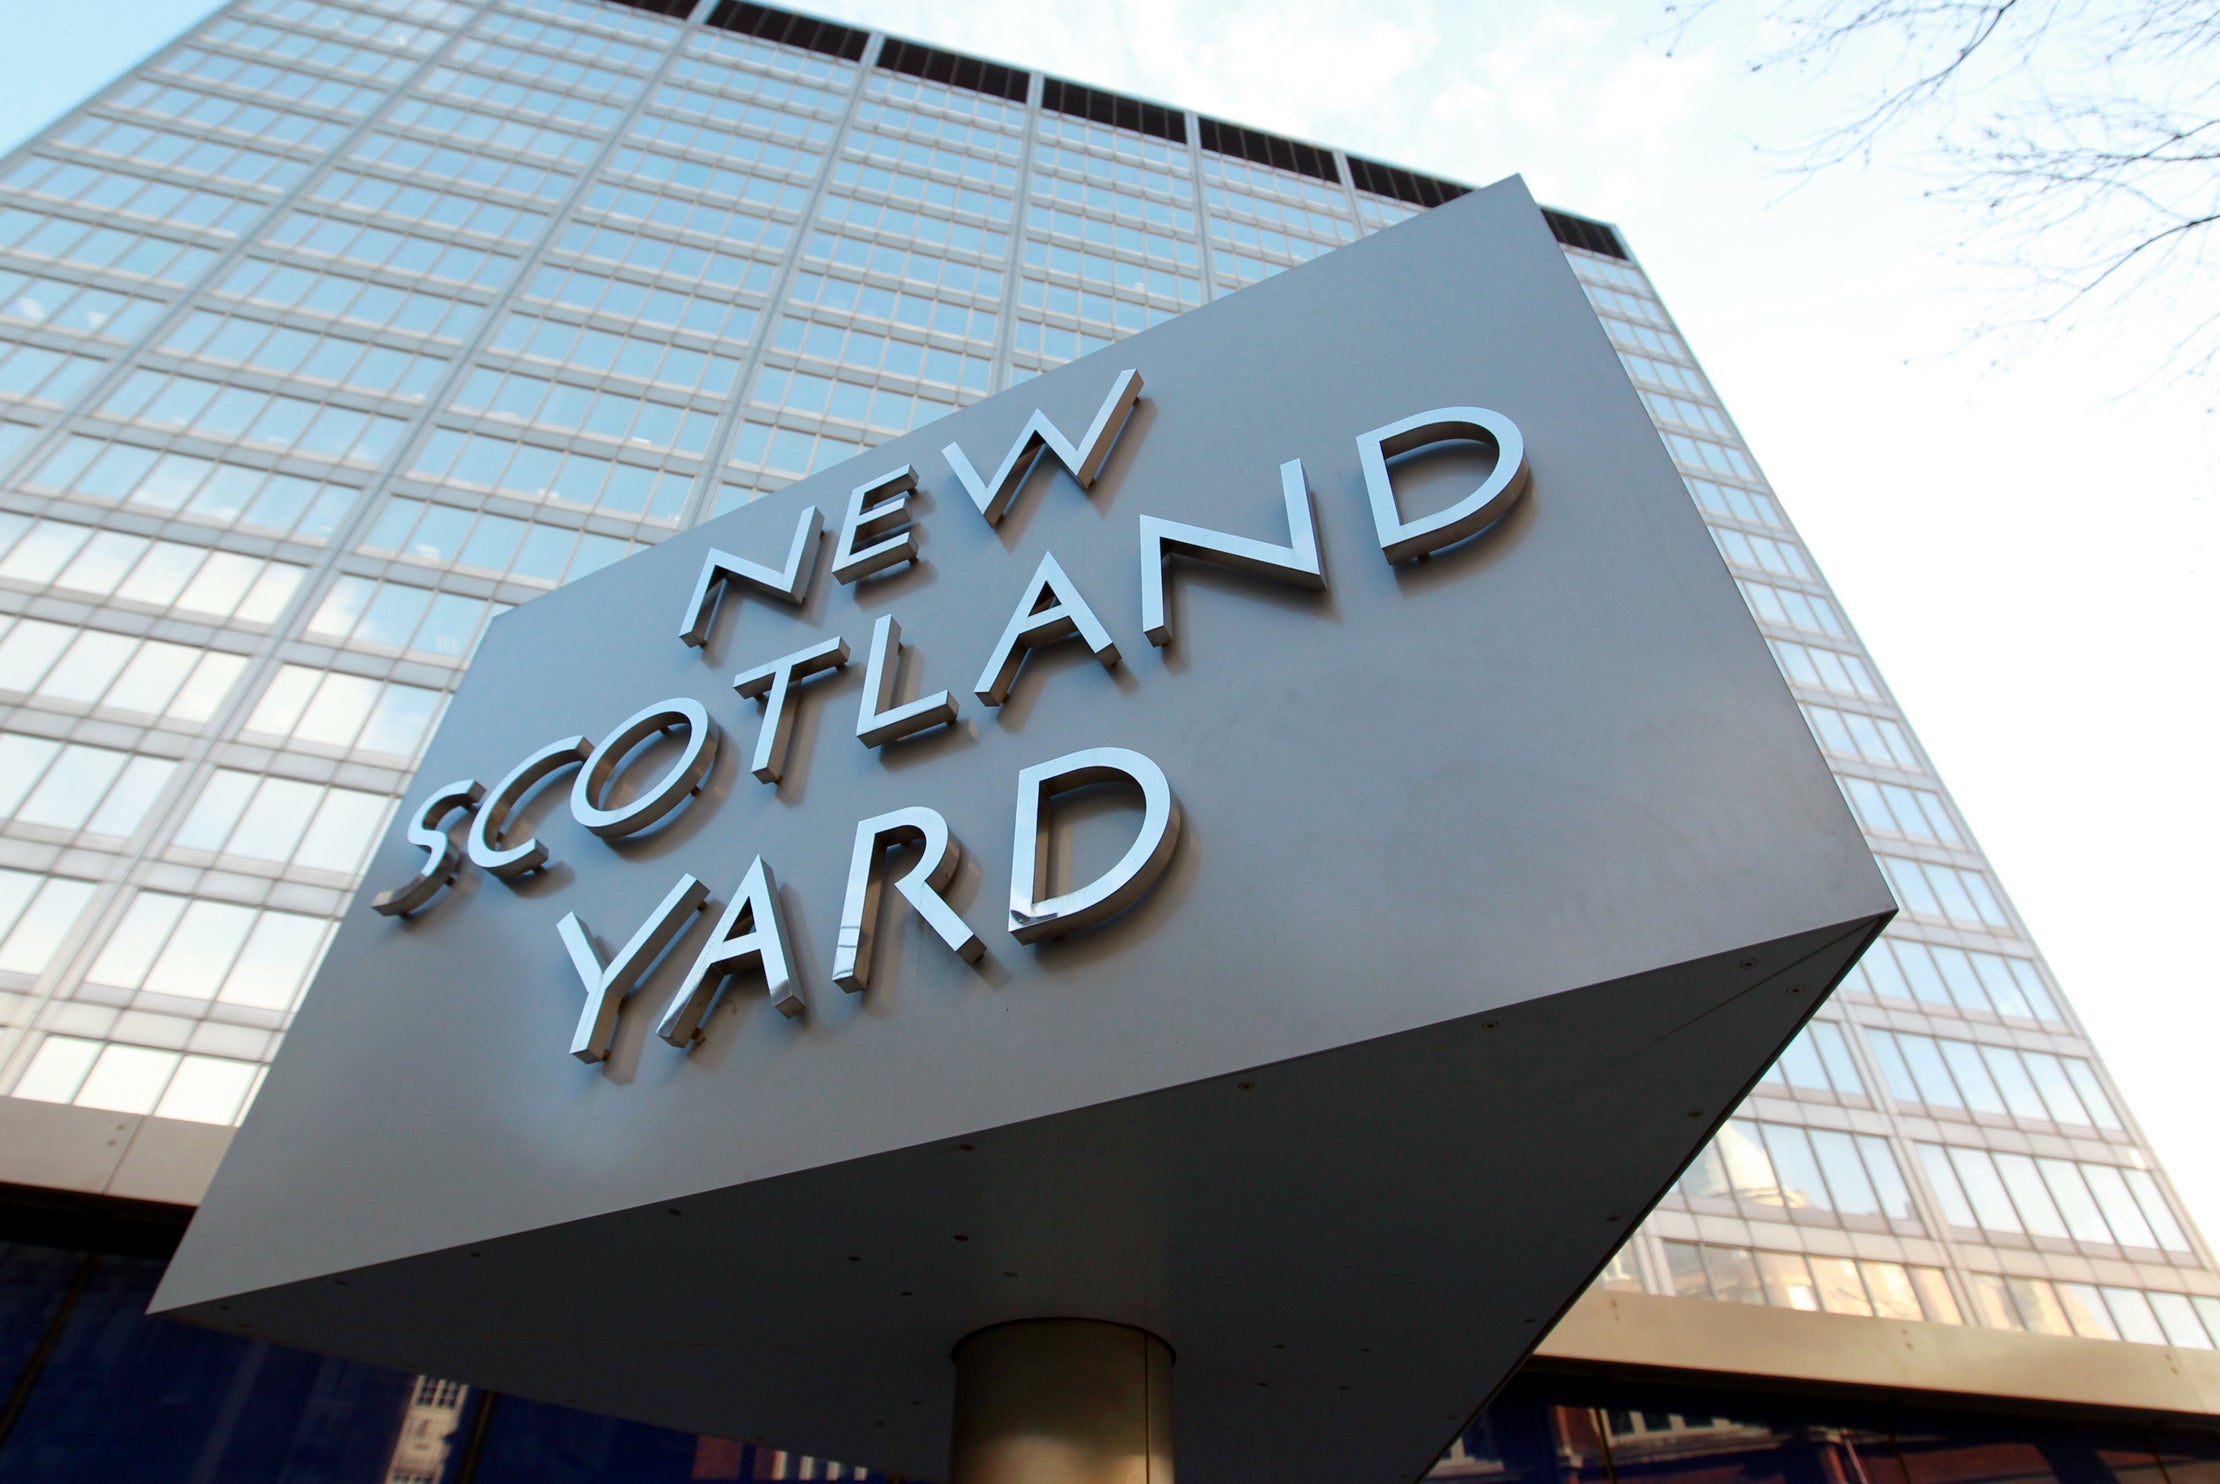 A Metropolitan Police officer has been charged with rape